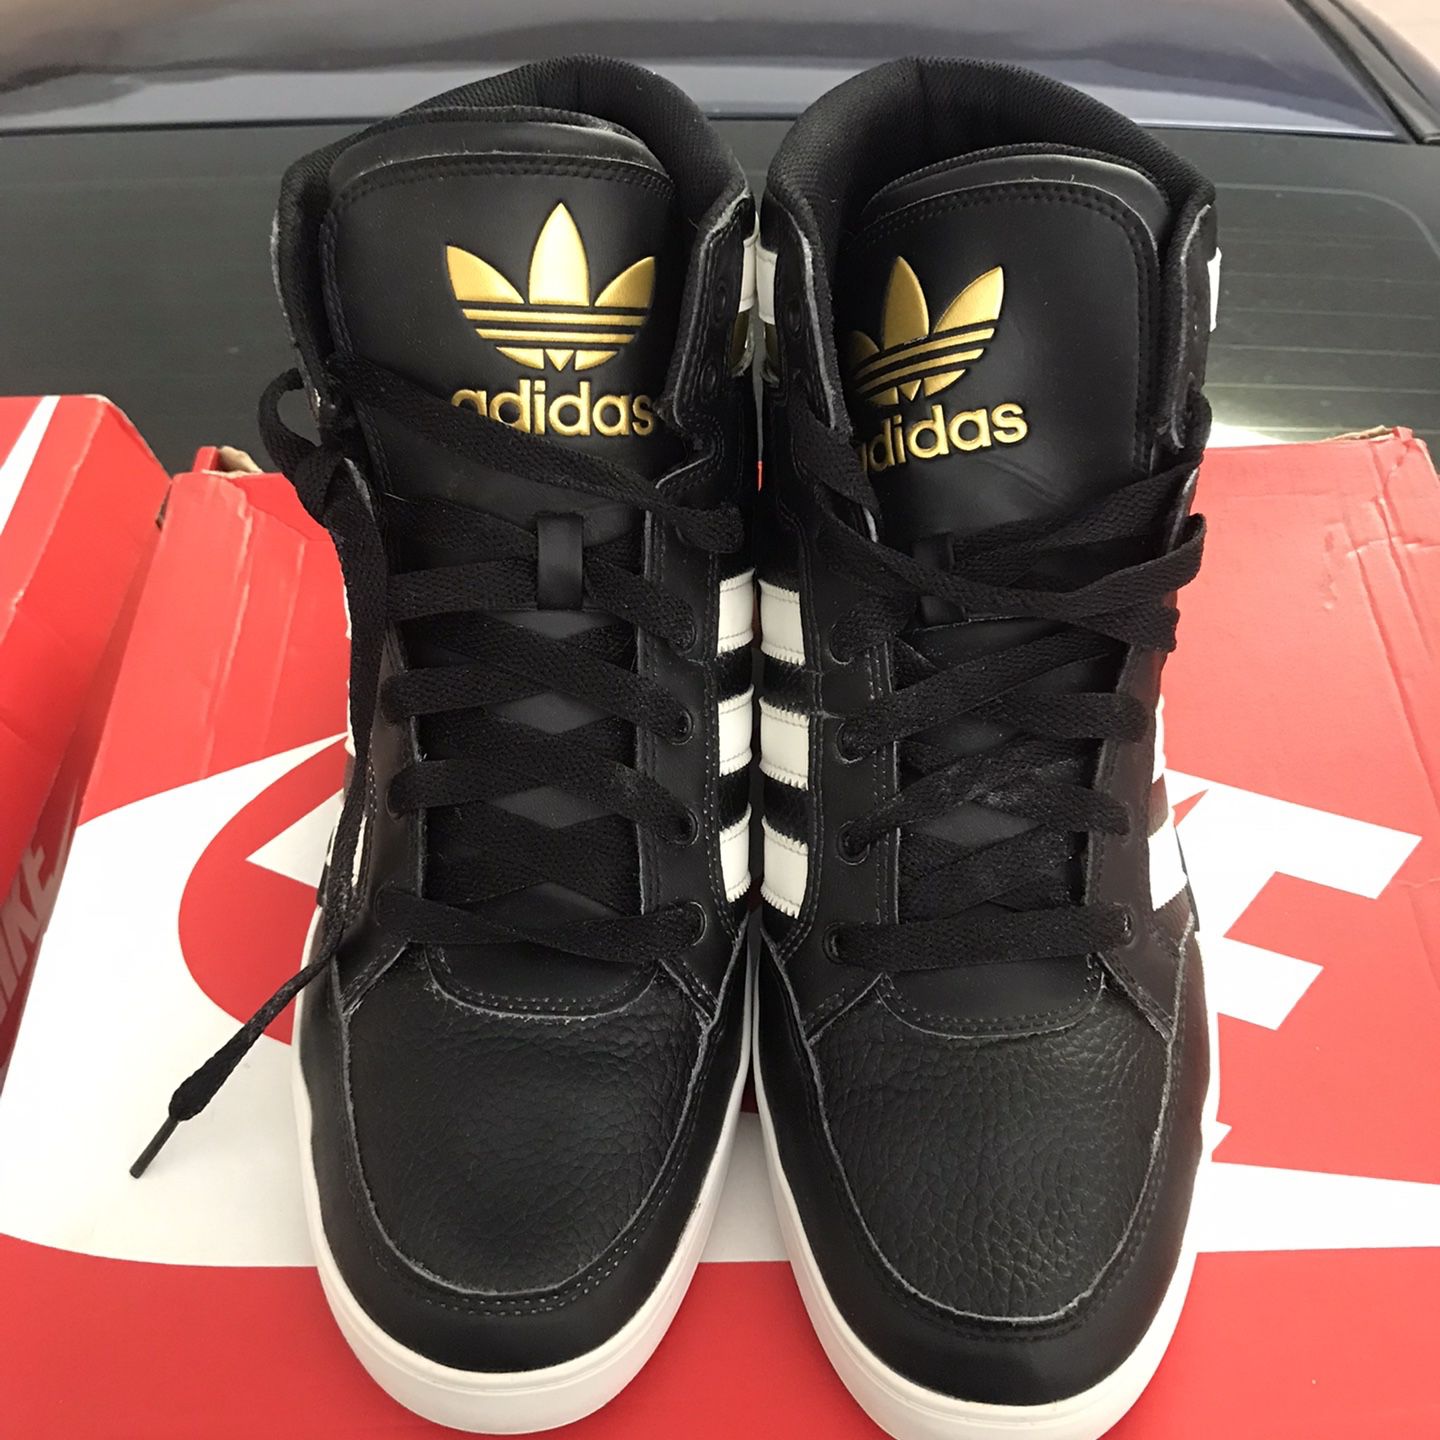 Adidas Hard HIGH 'BLACK WHITE GOLD' Sale in Los Angeles, CA - OfferUp